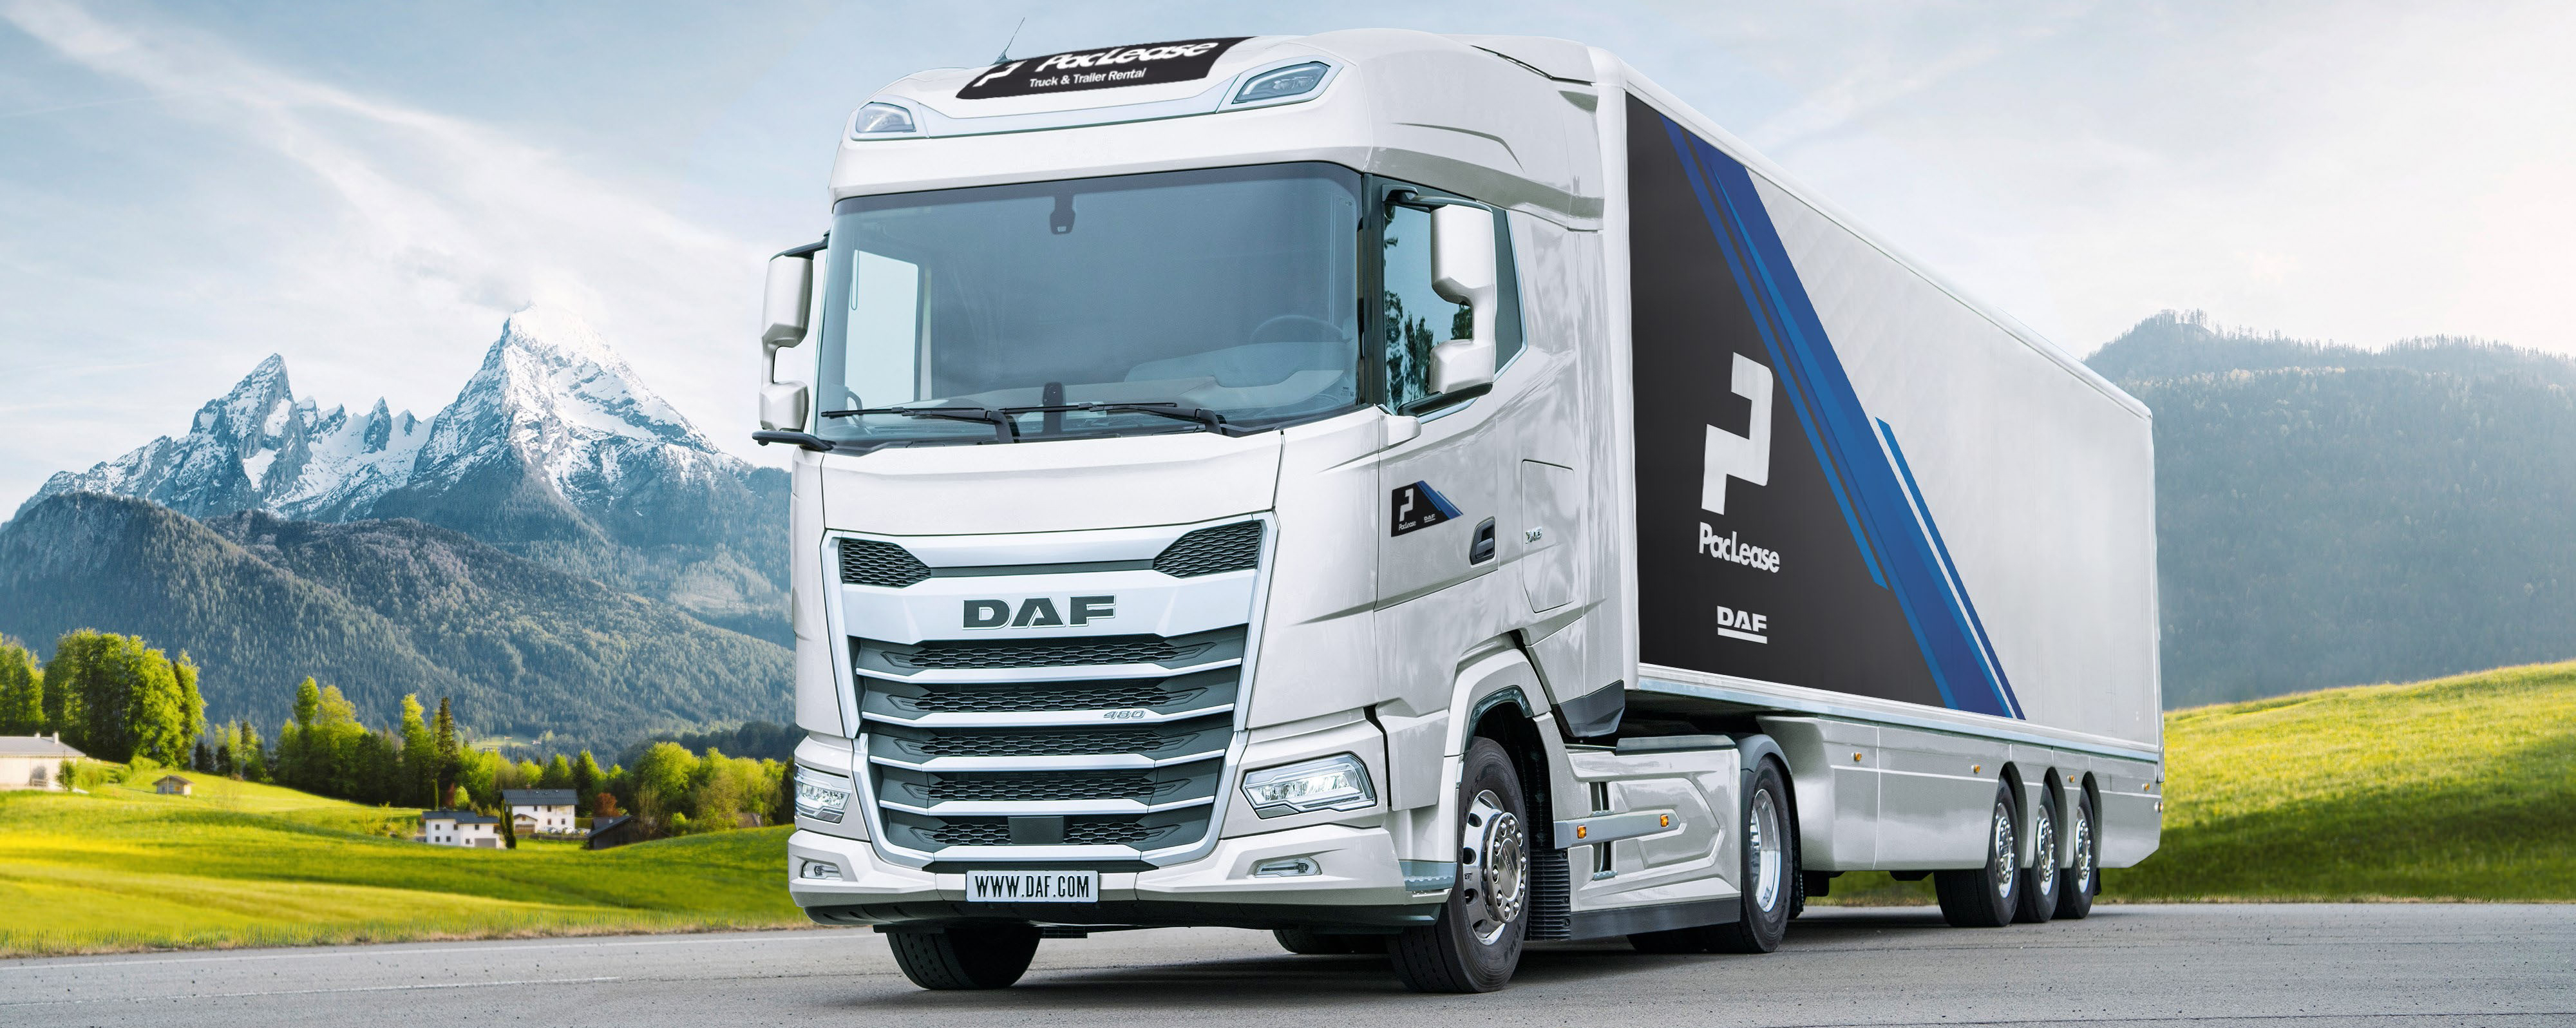 DAF-MultiSupport-Paclease-DE-940